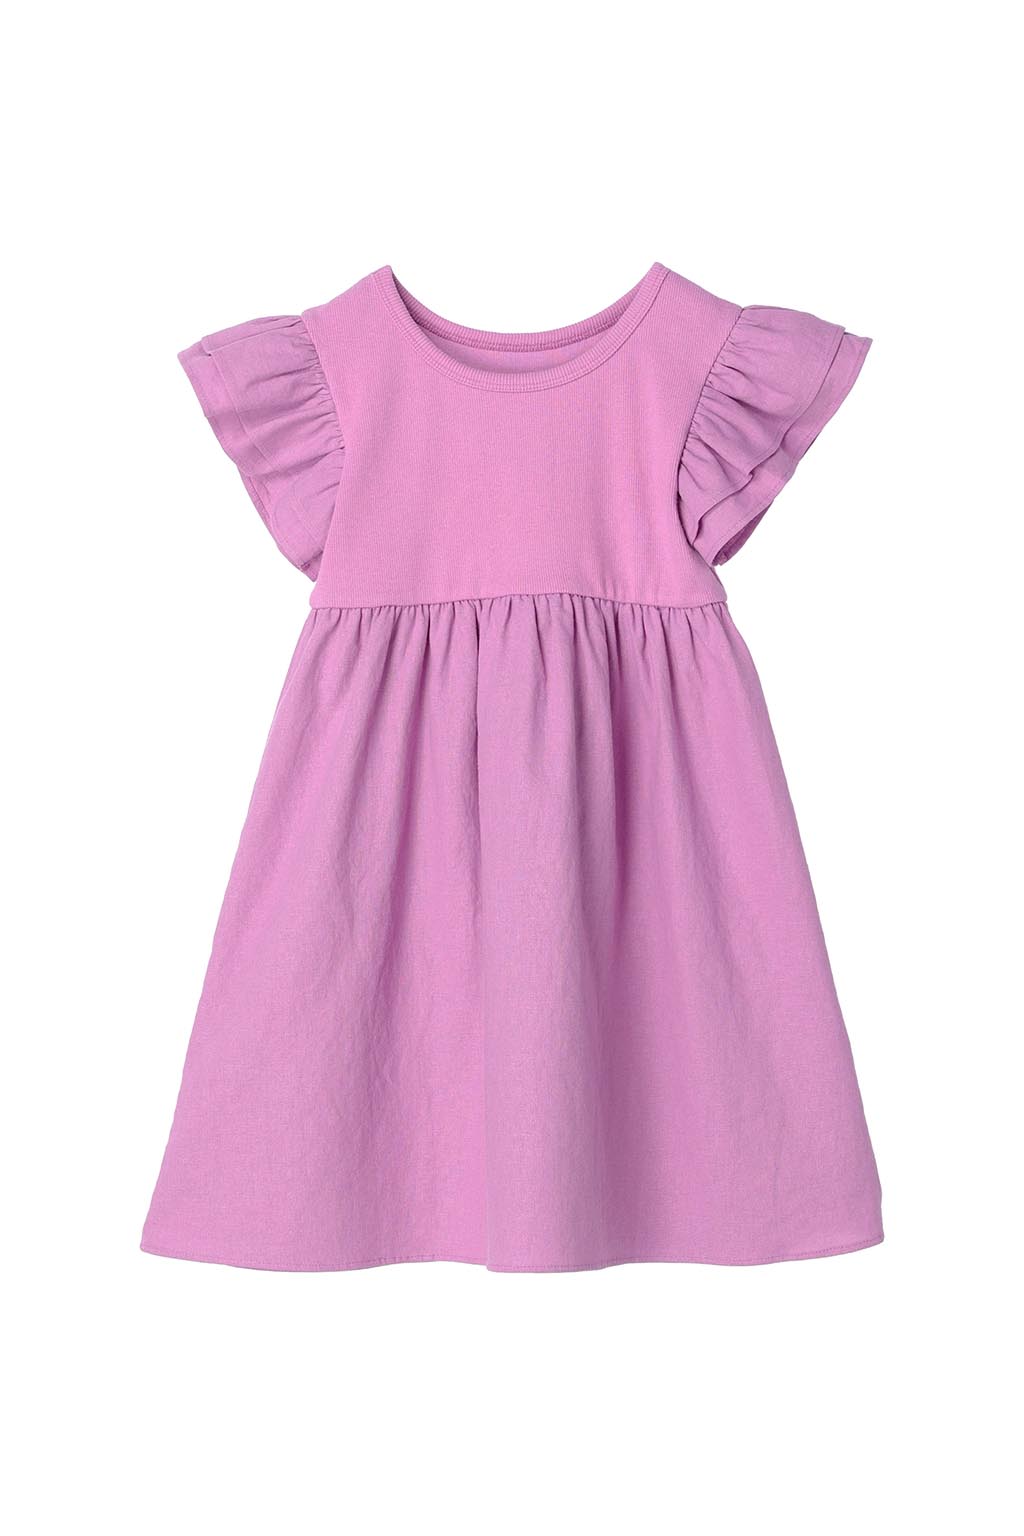 BABY ALEXIA Frill Sleeve Dress Pink2